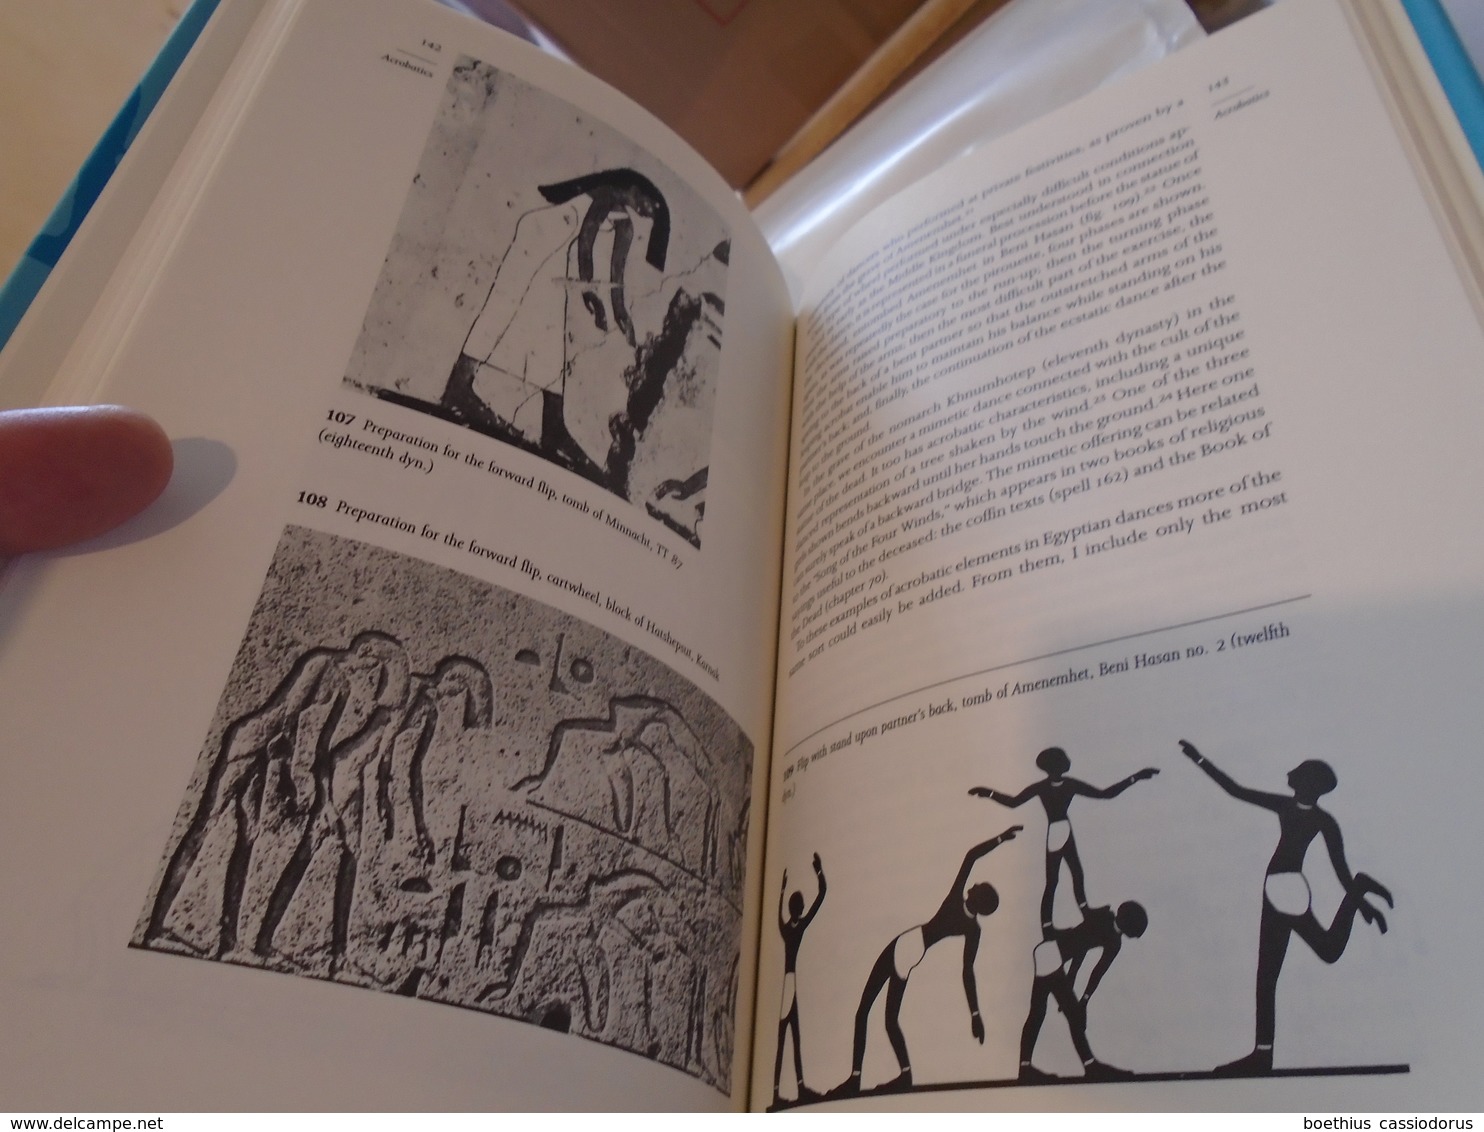 Egypte : SPORTS AND GAMES OF ANCIENT EGYPT 1992 WOLFGANG DECKER - Archéologie